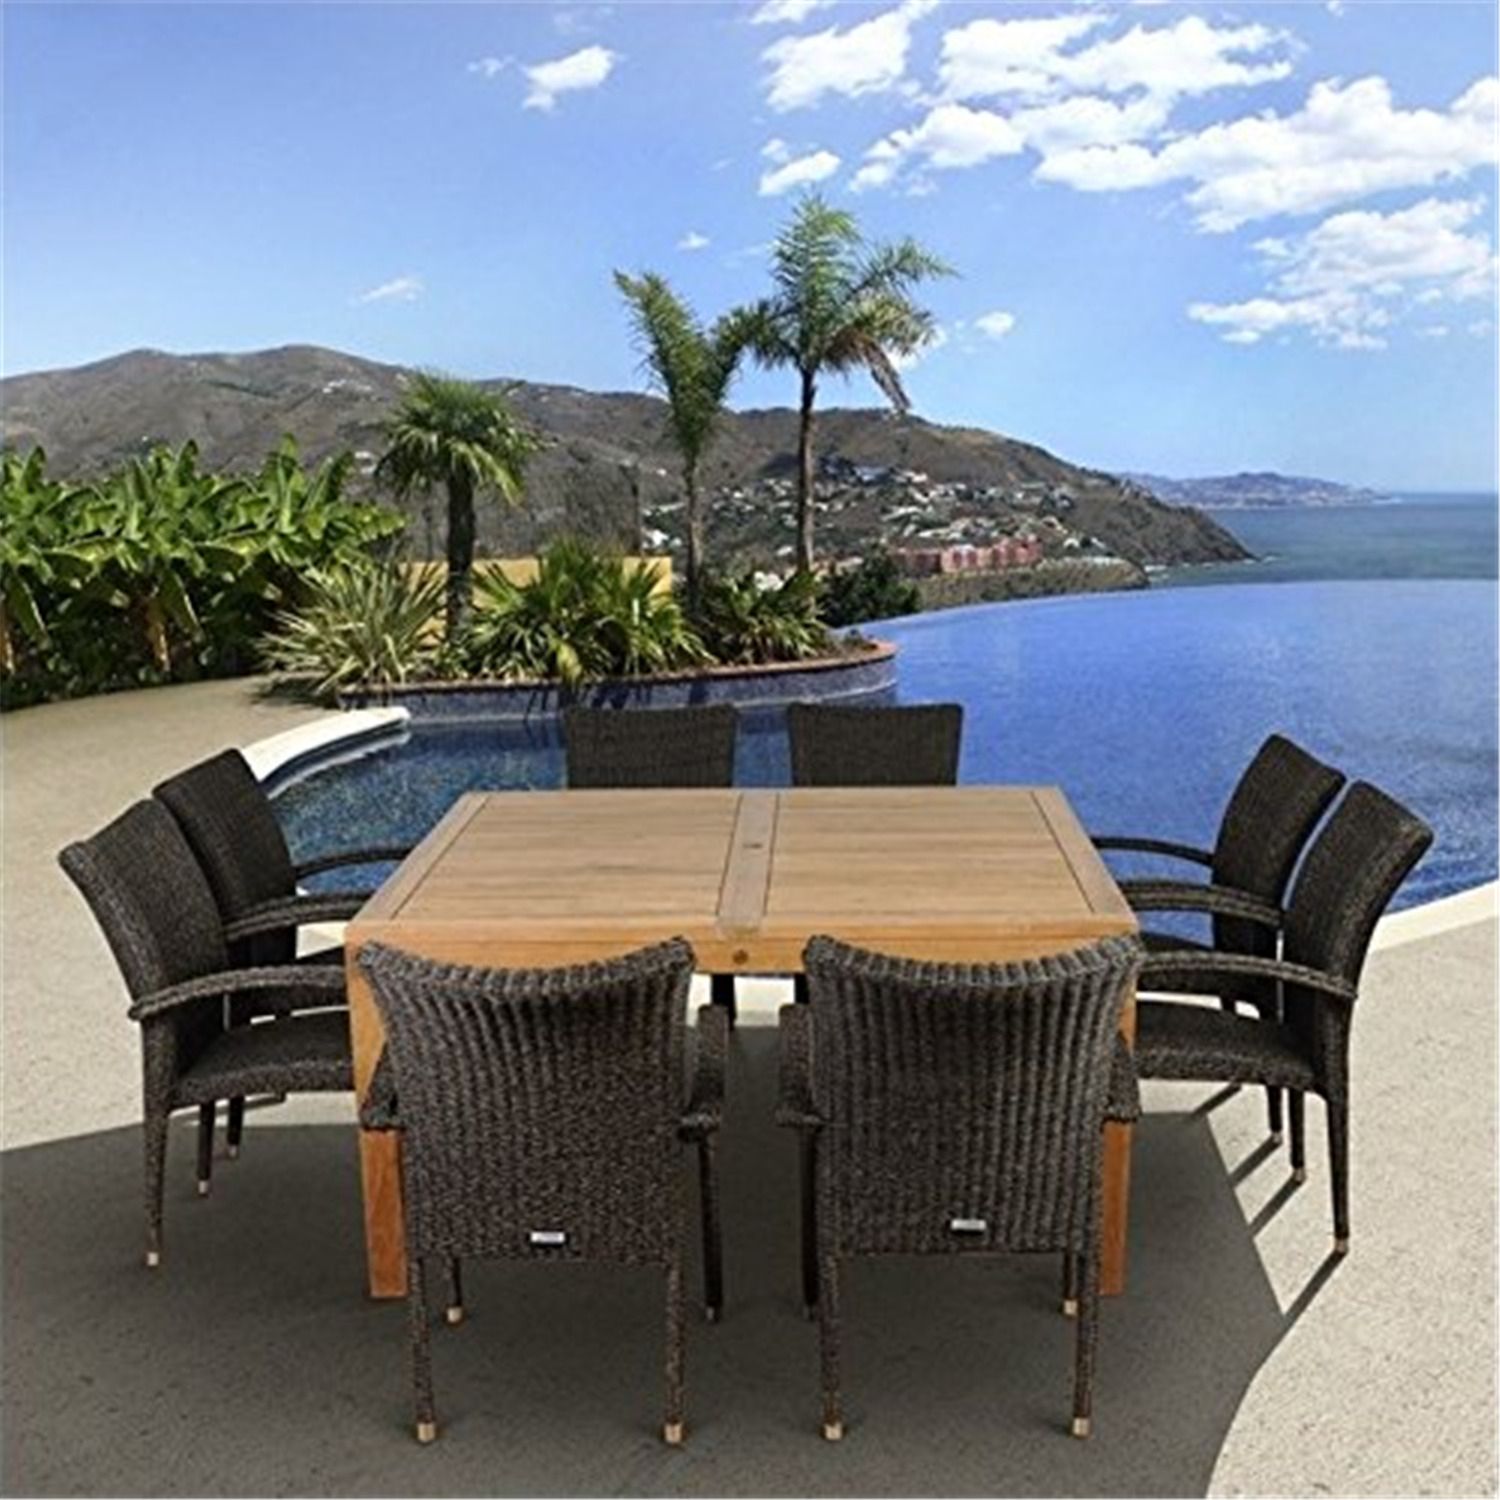 Versailles 9 Piece Teak Square Patio Dining Set – Walmart – Walmart Throughout Square 9 Piece Outdoor Dining Sets (View 7 of 15)